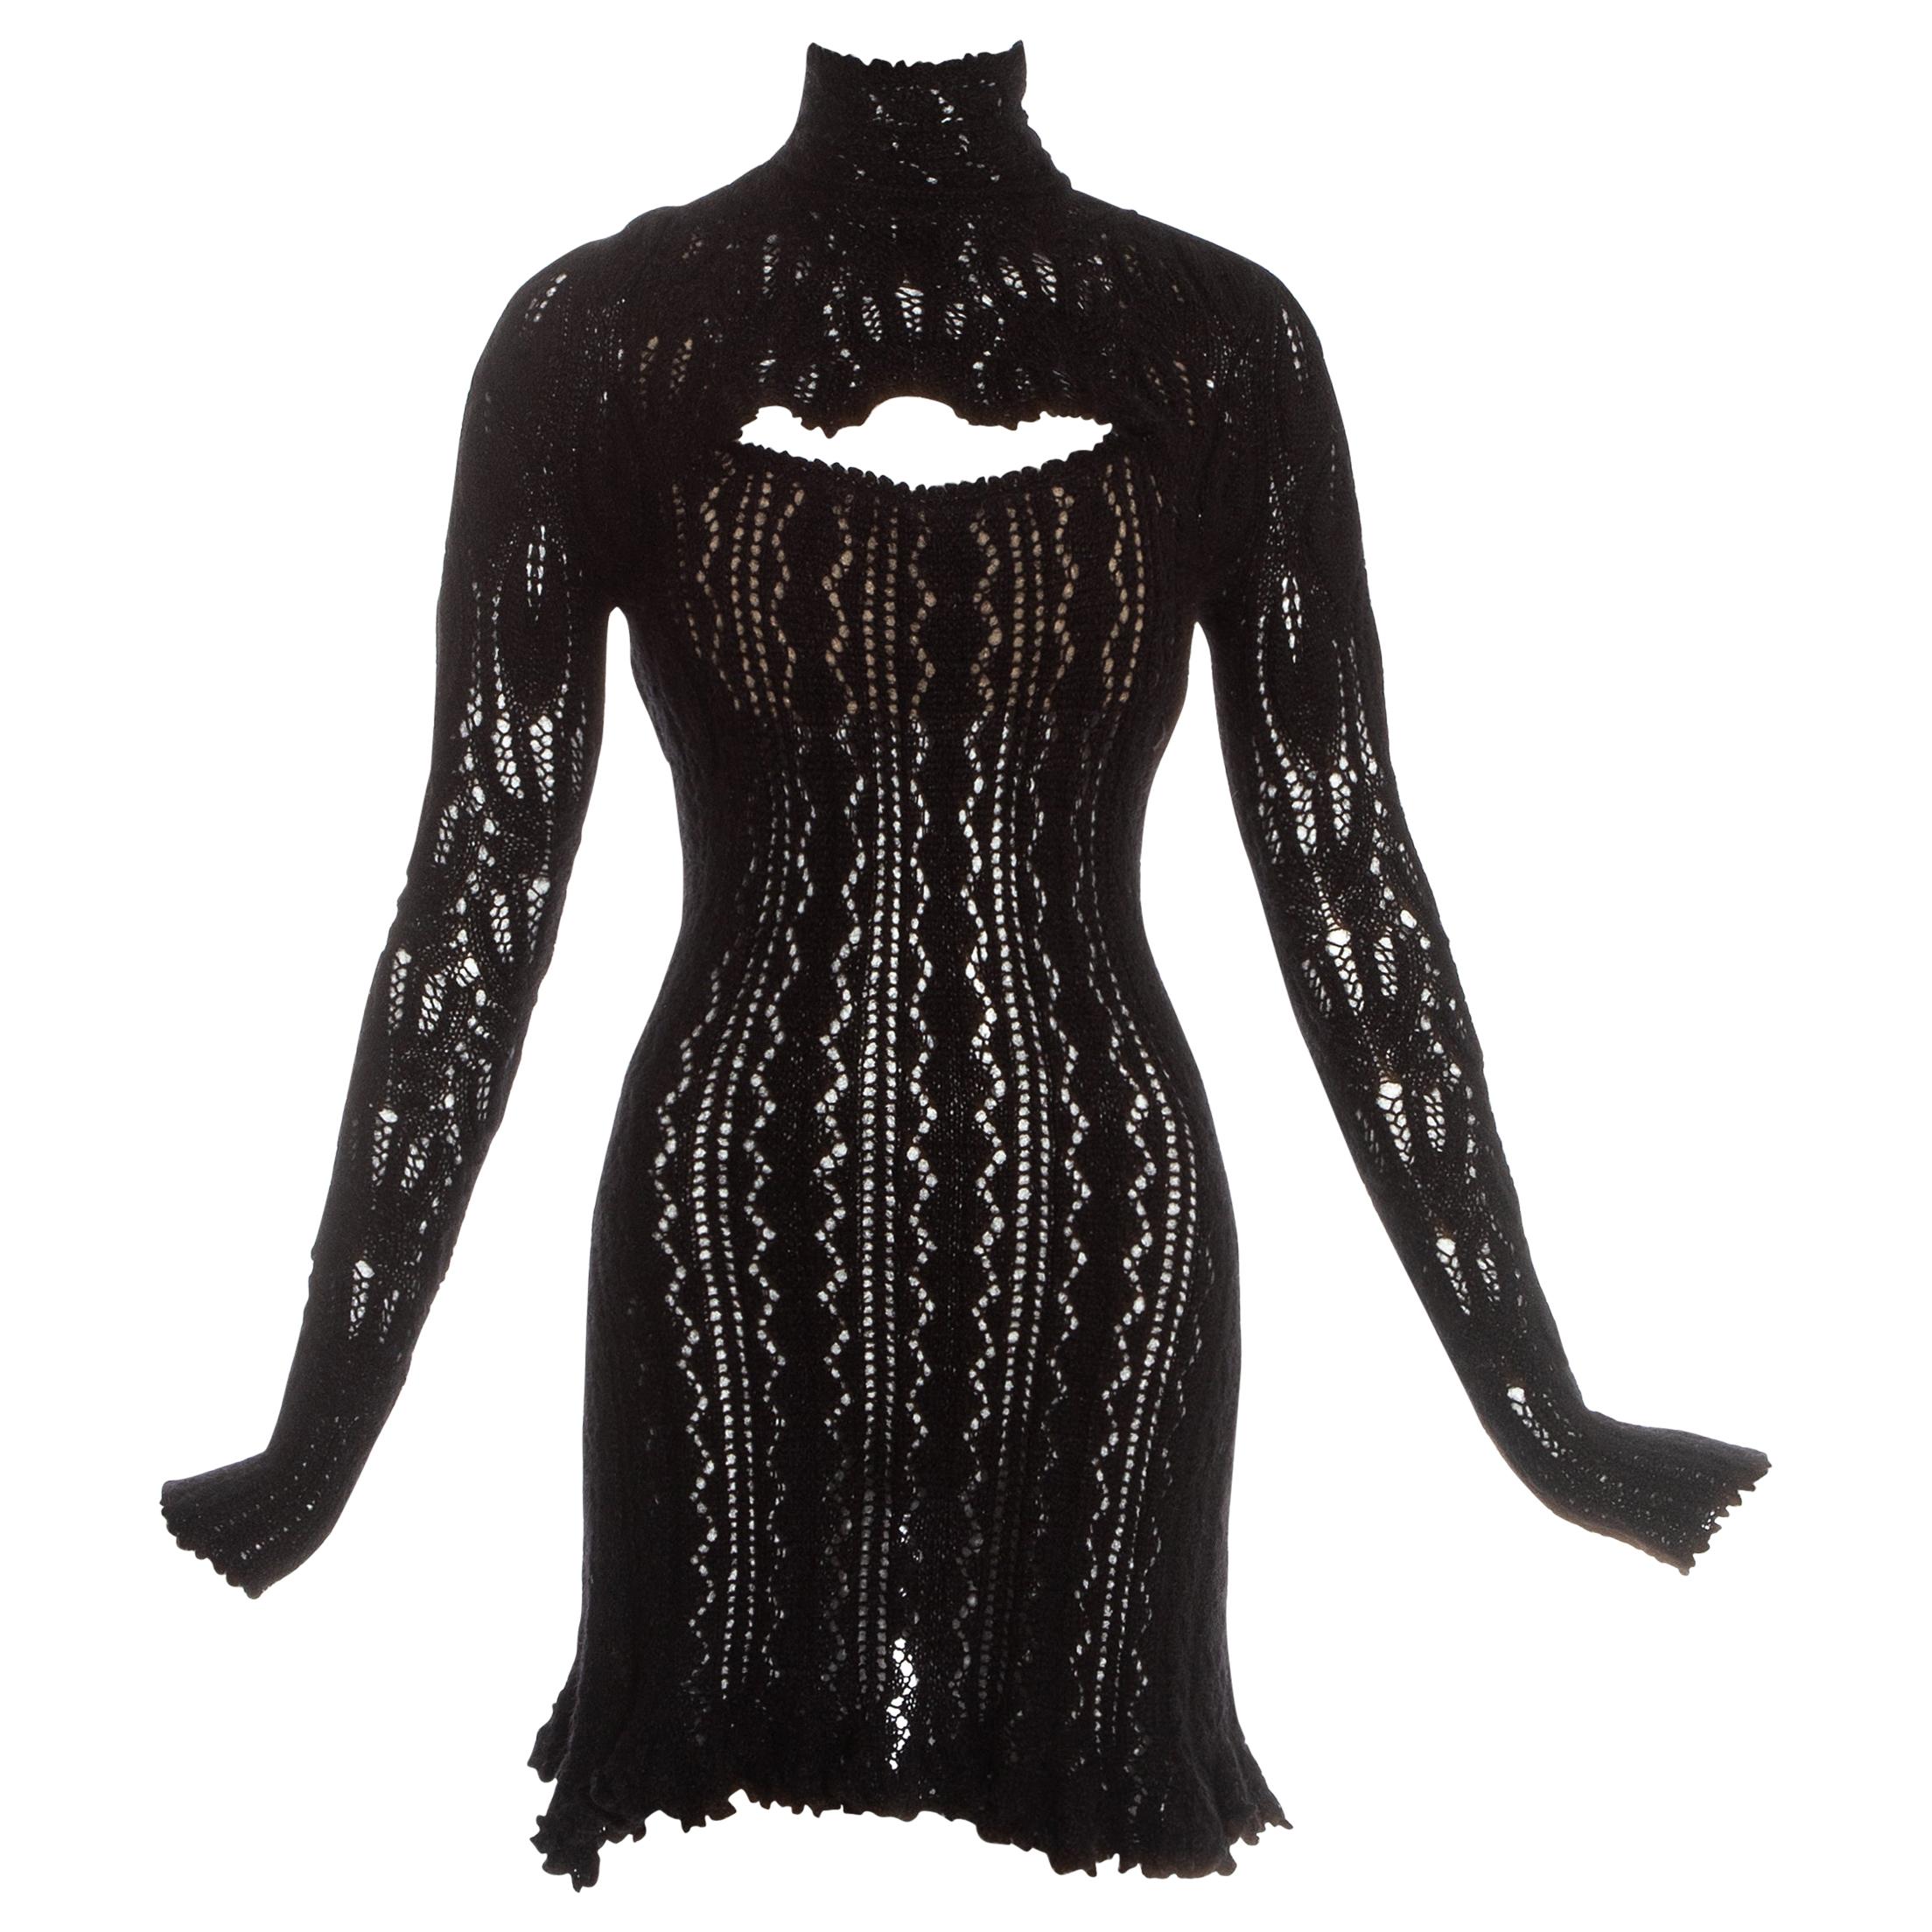 Vivienne Westwood black crochet knit corseted mini dress with cut out, fw 1993